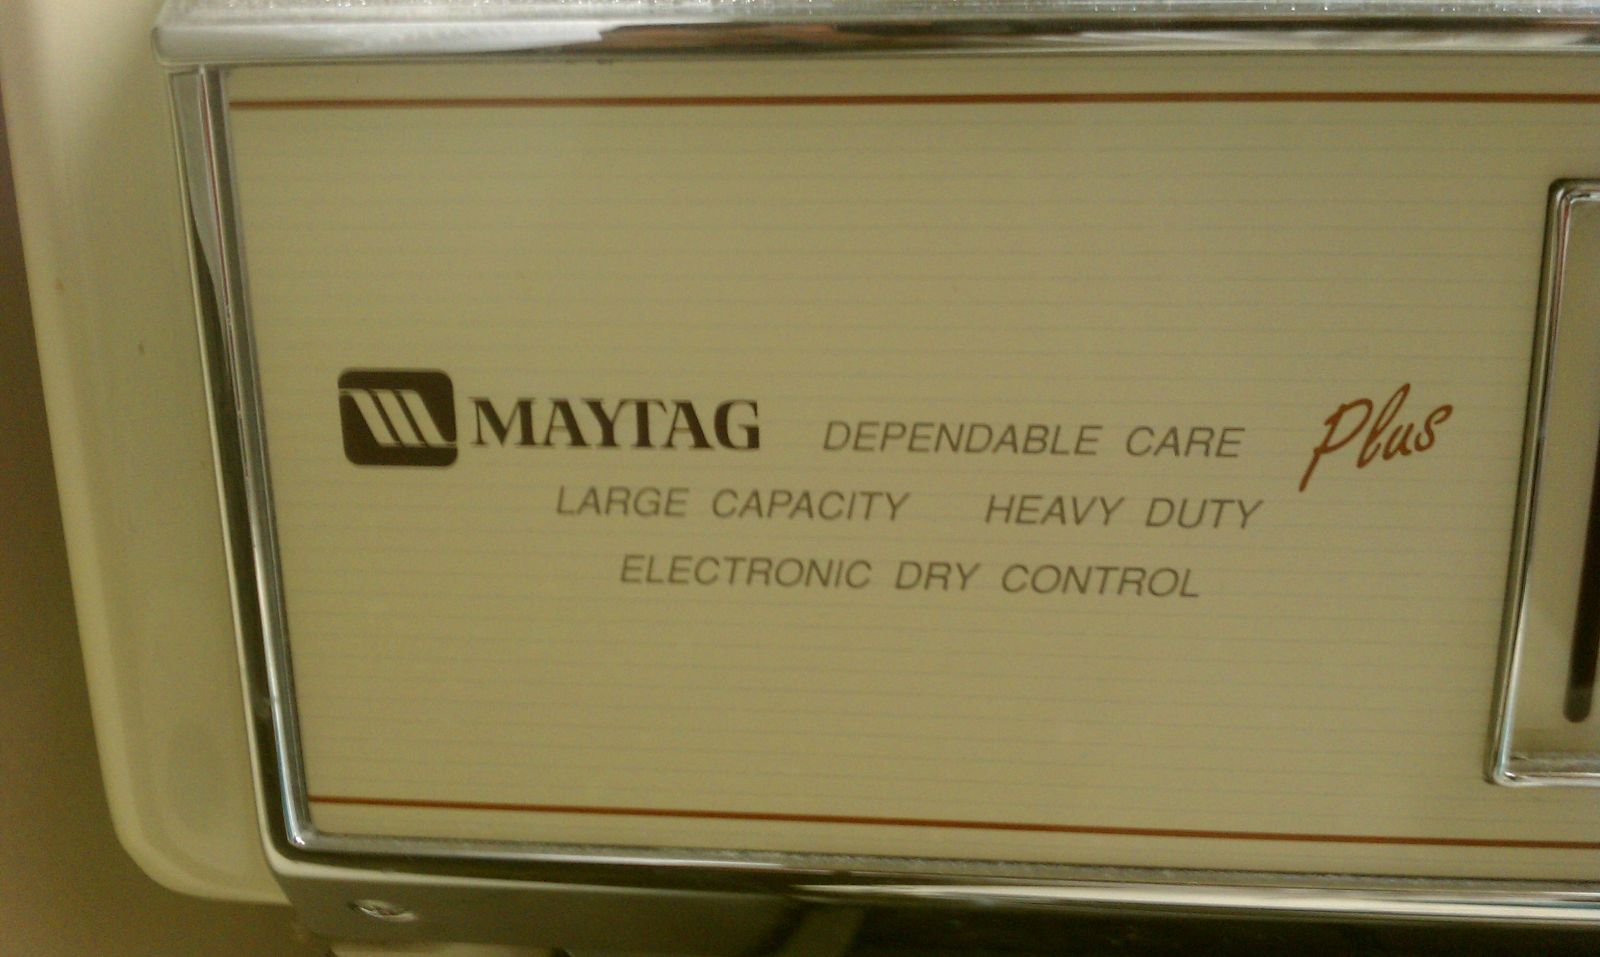 Maytag-Outside labeling